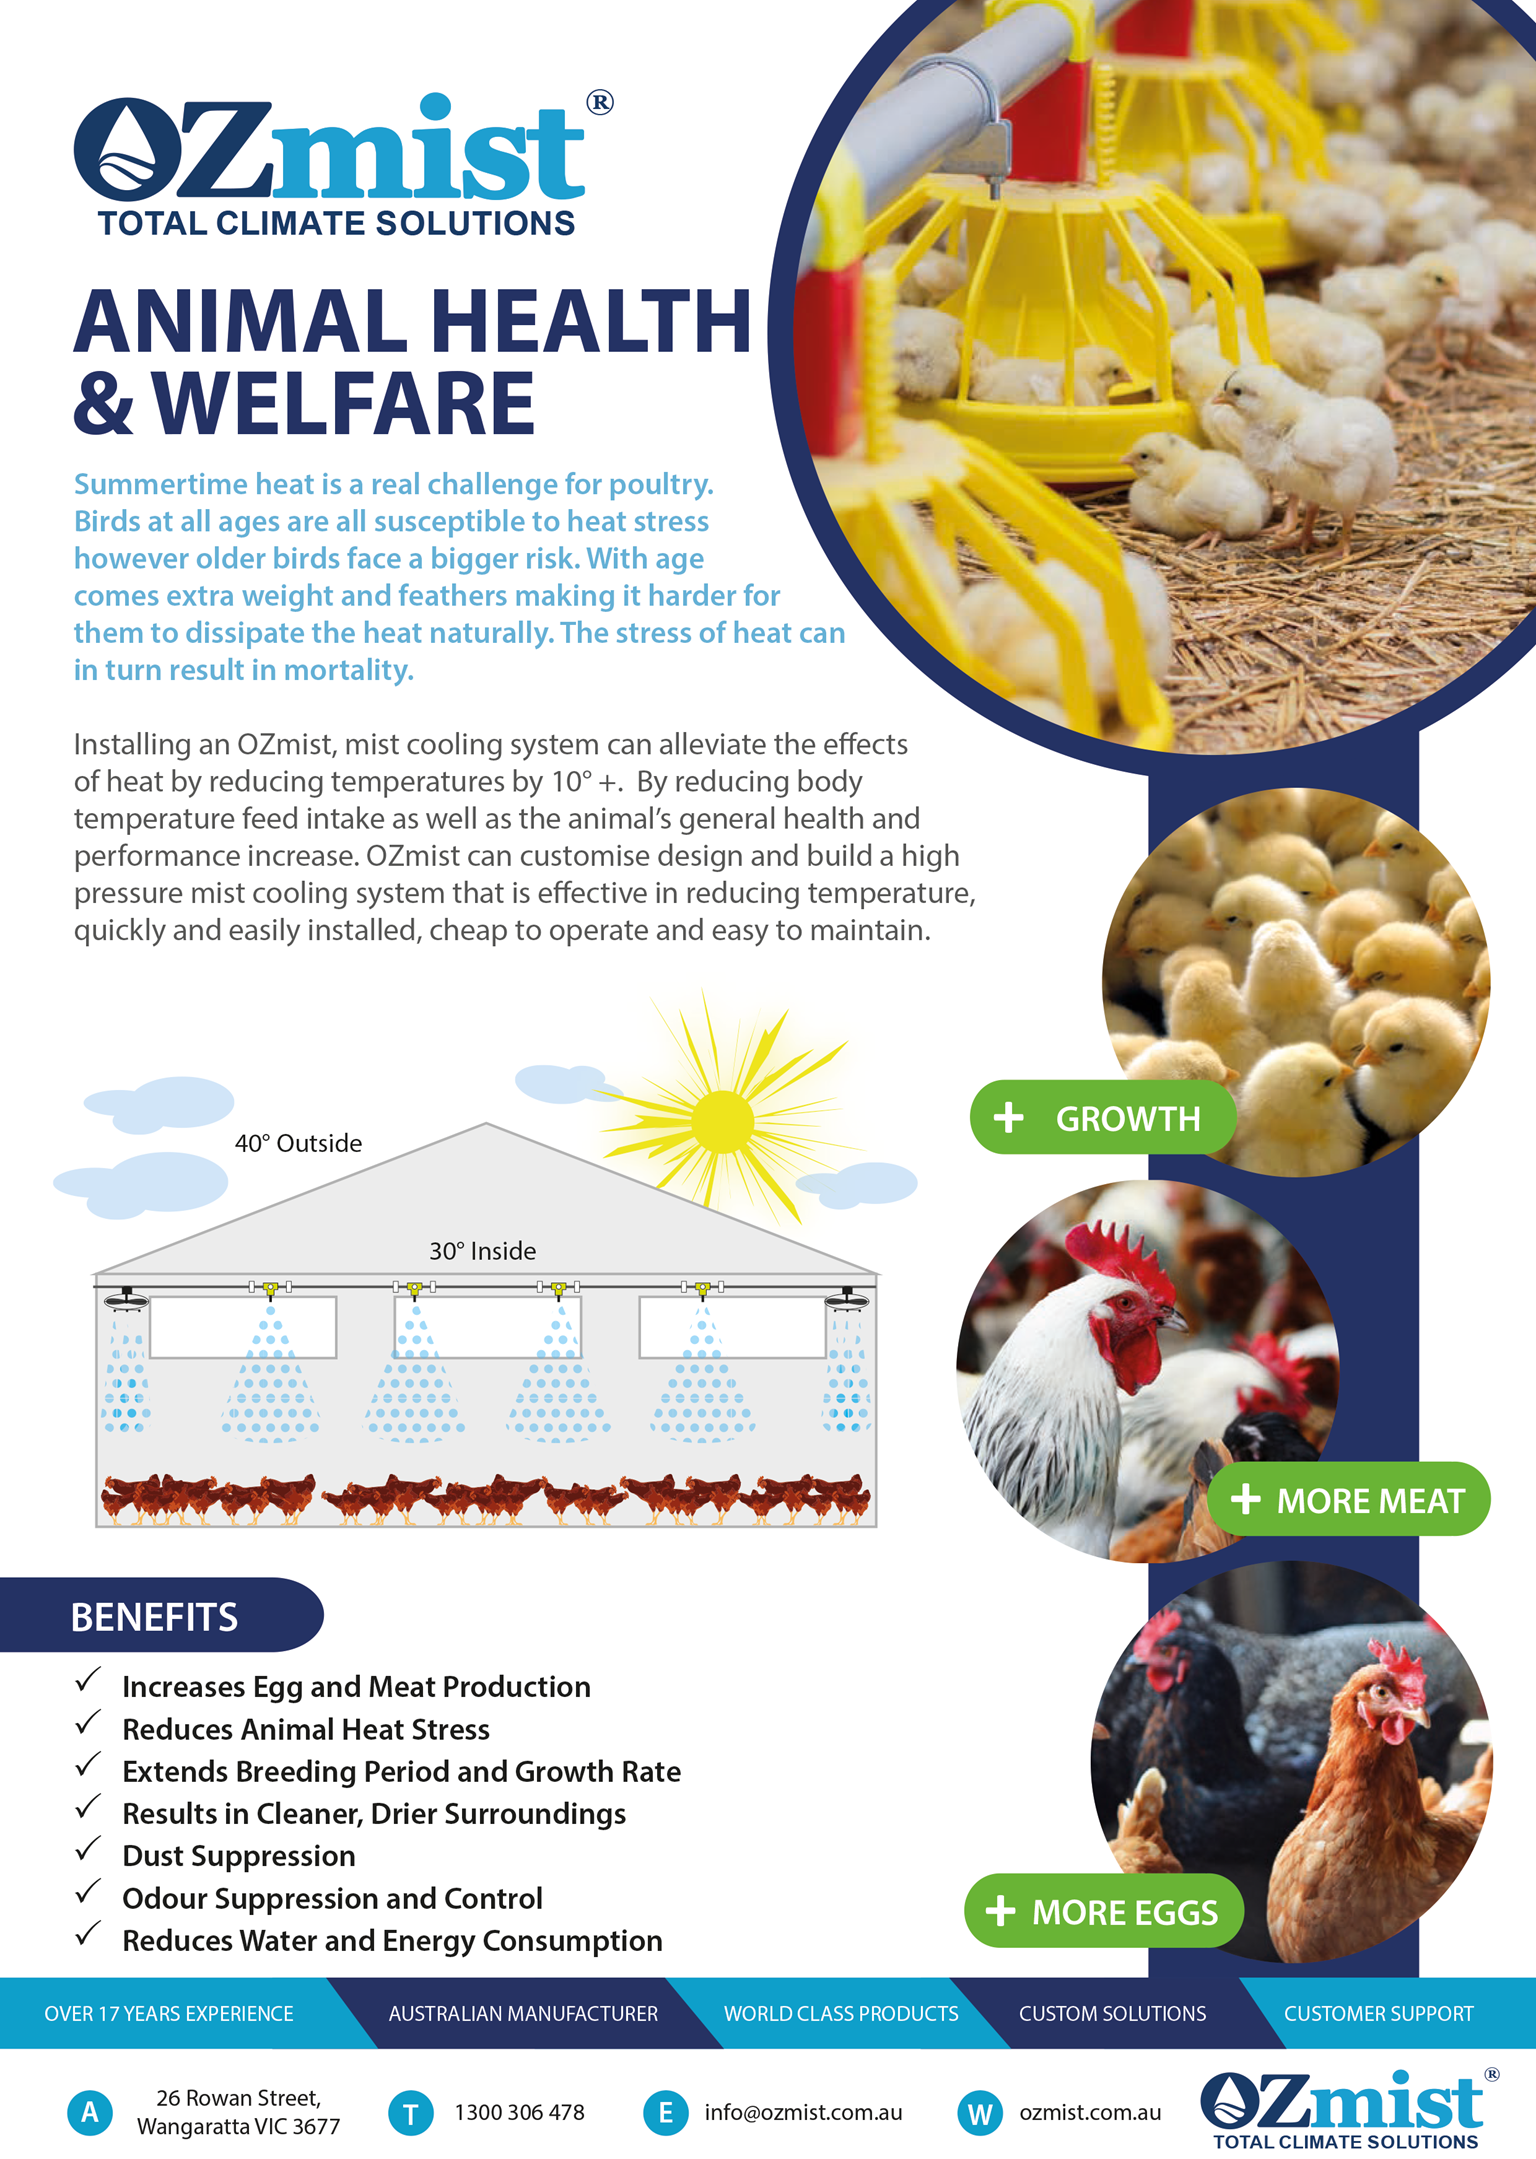 OZmist Mist Cooling System for Animal Health and Welfare